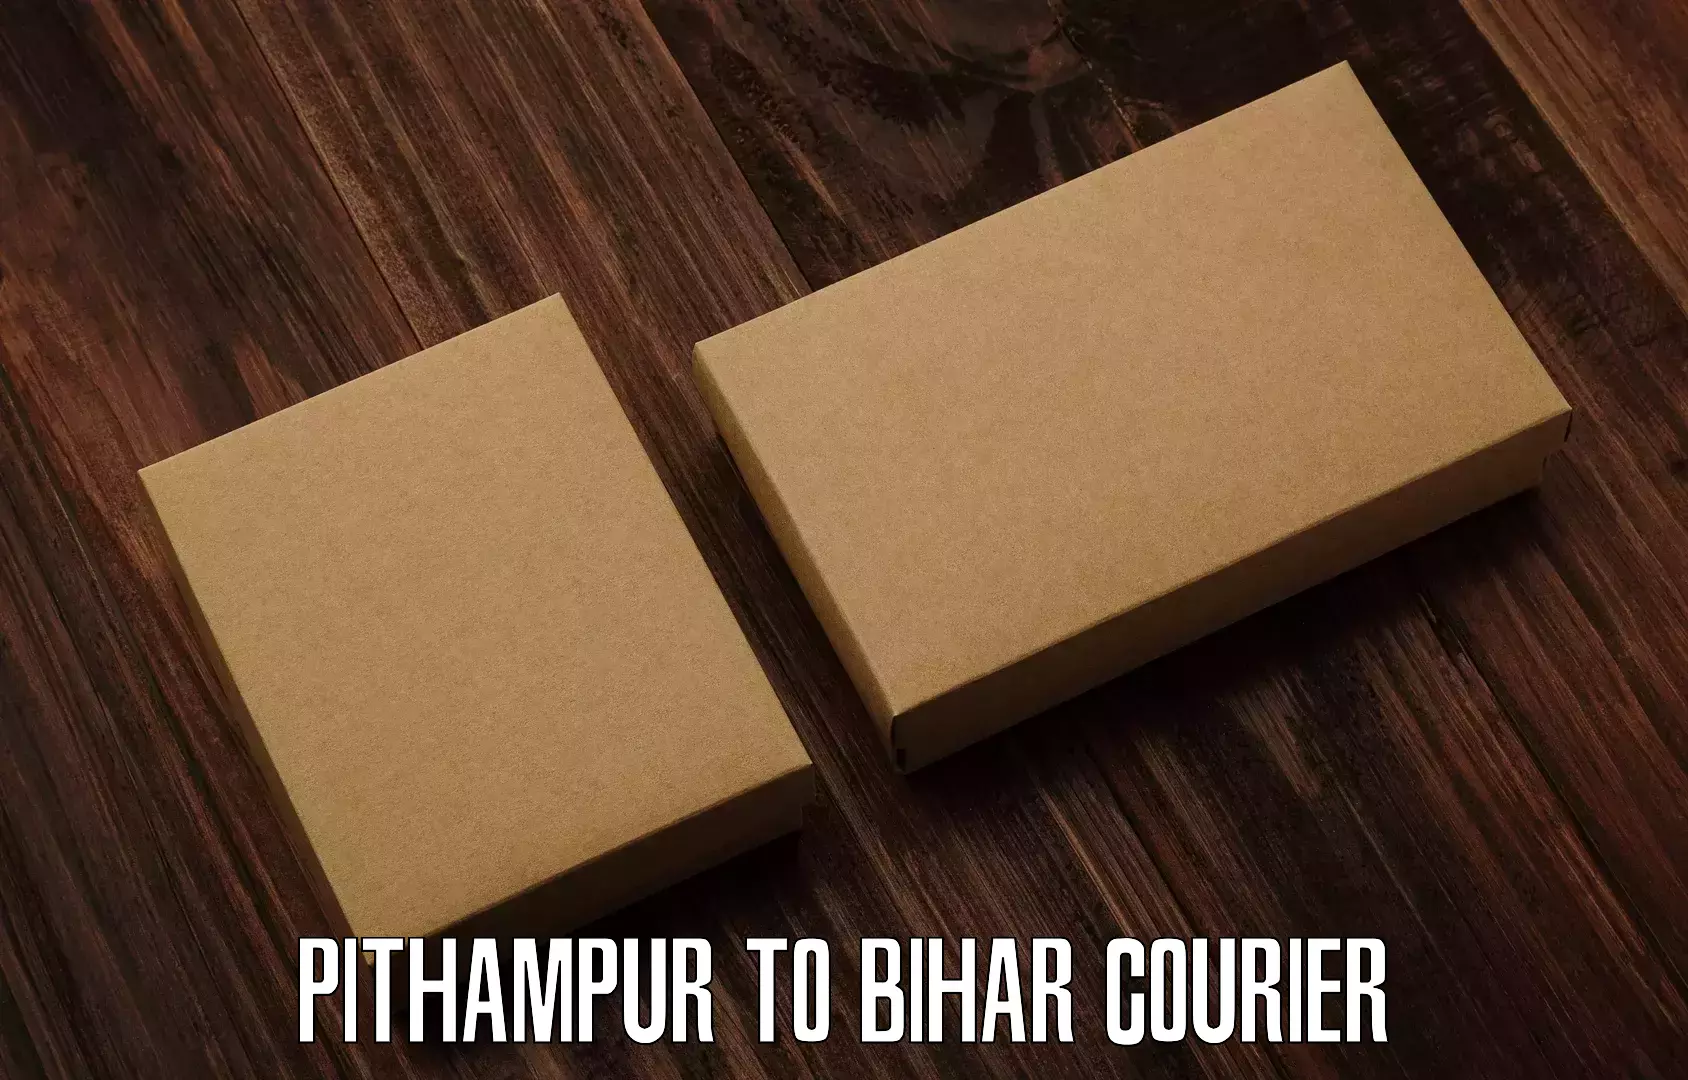 Courier service efficiency in Pithampur to Aurangabad Bihar